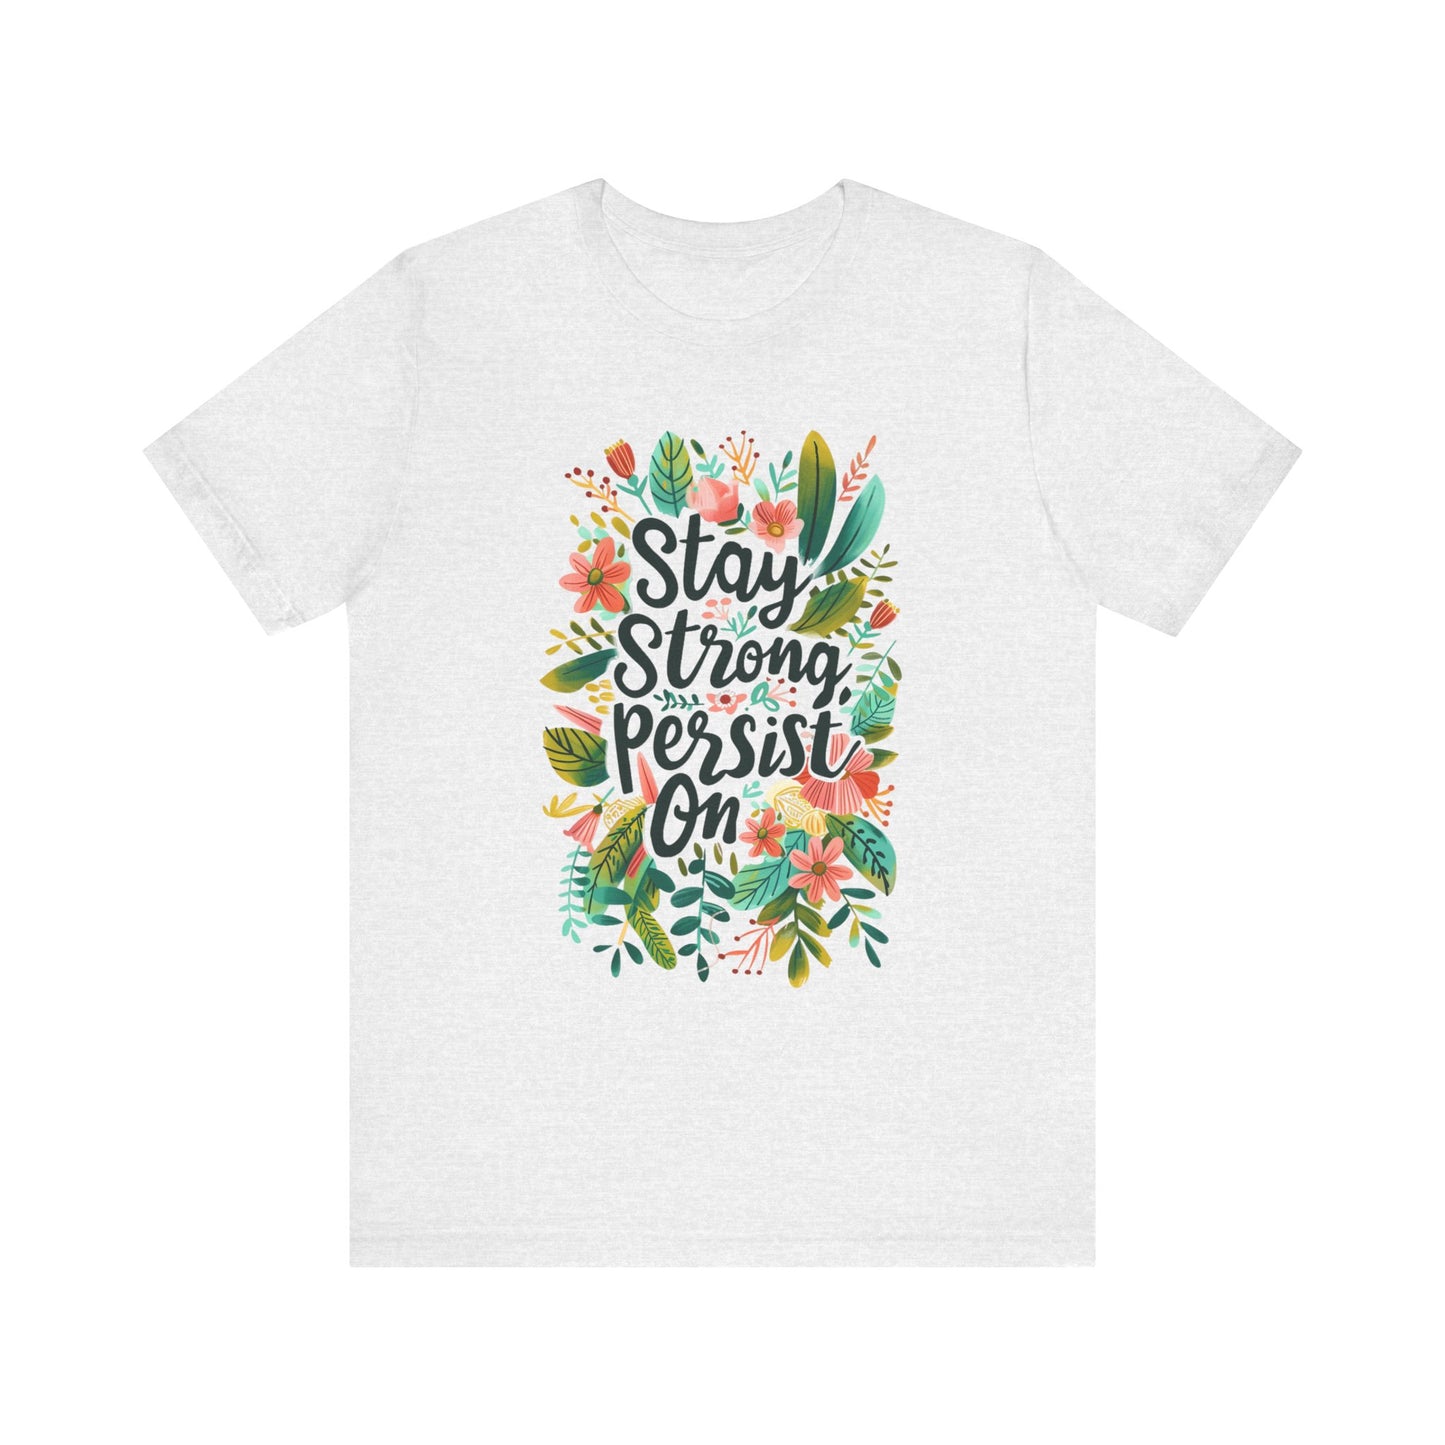 Stay Strong Persist On Women's Inspirational Short Sleeve Tshirt